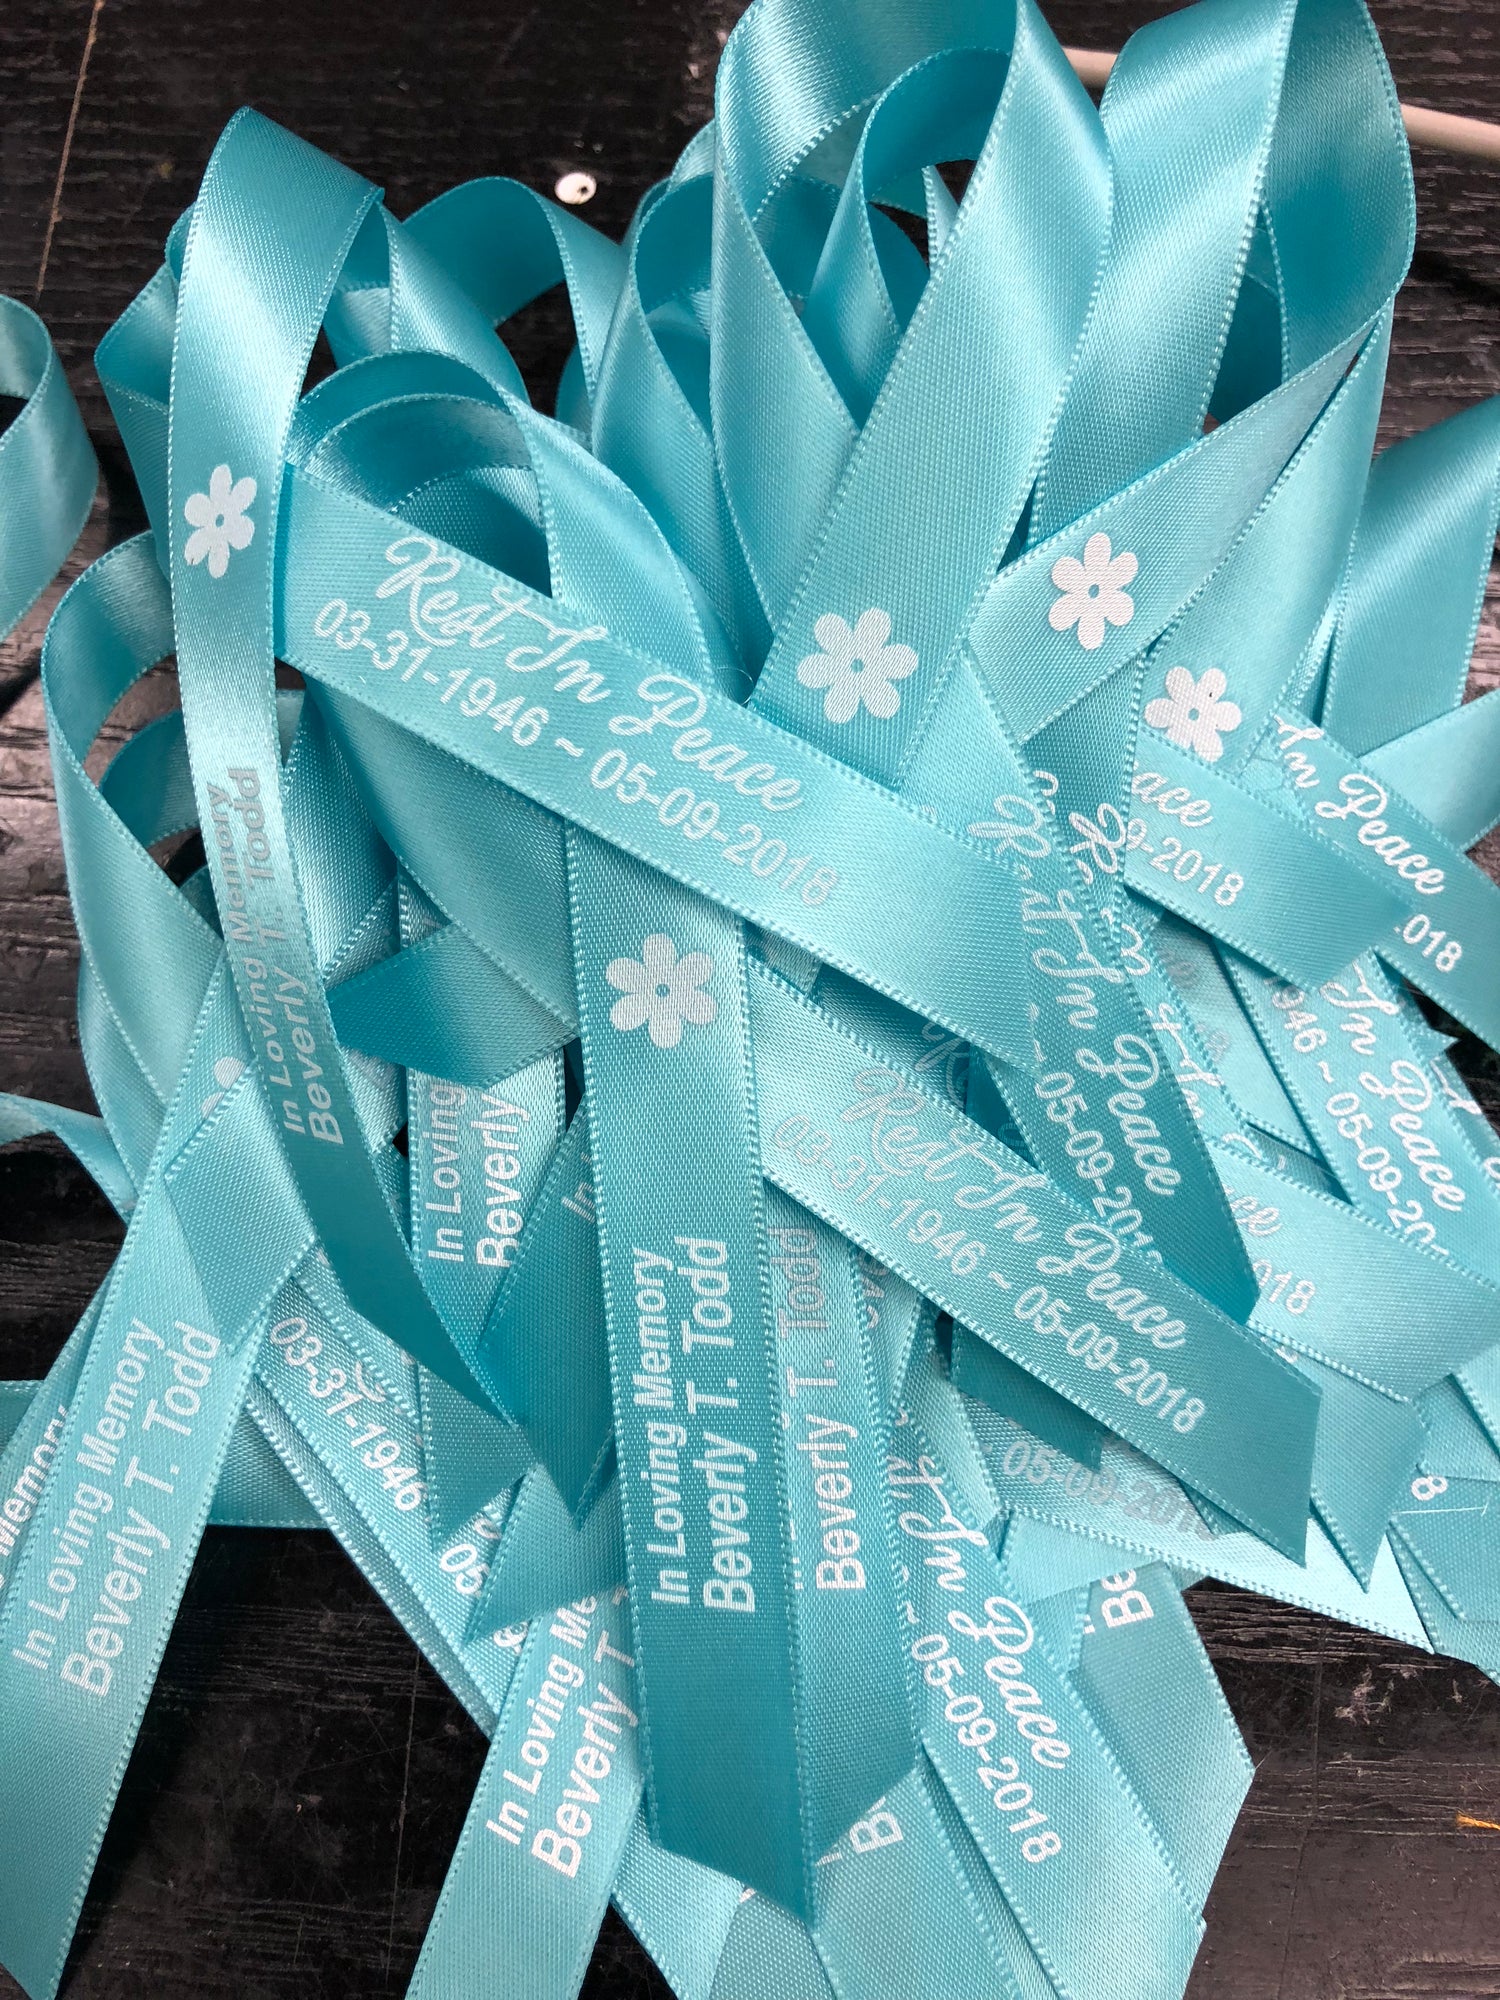 ovarian cancer ribbons